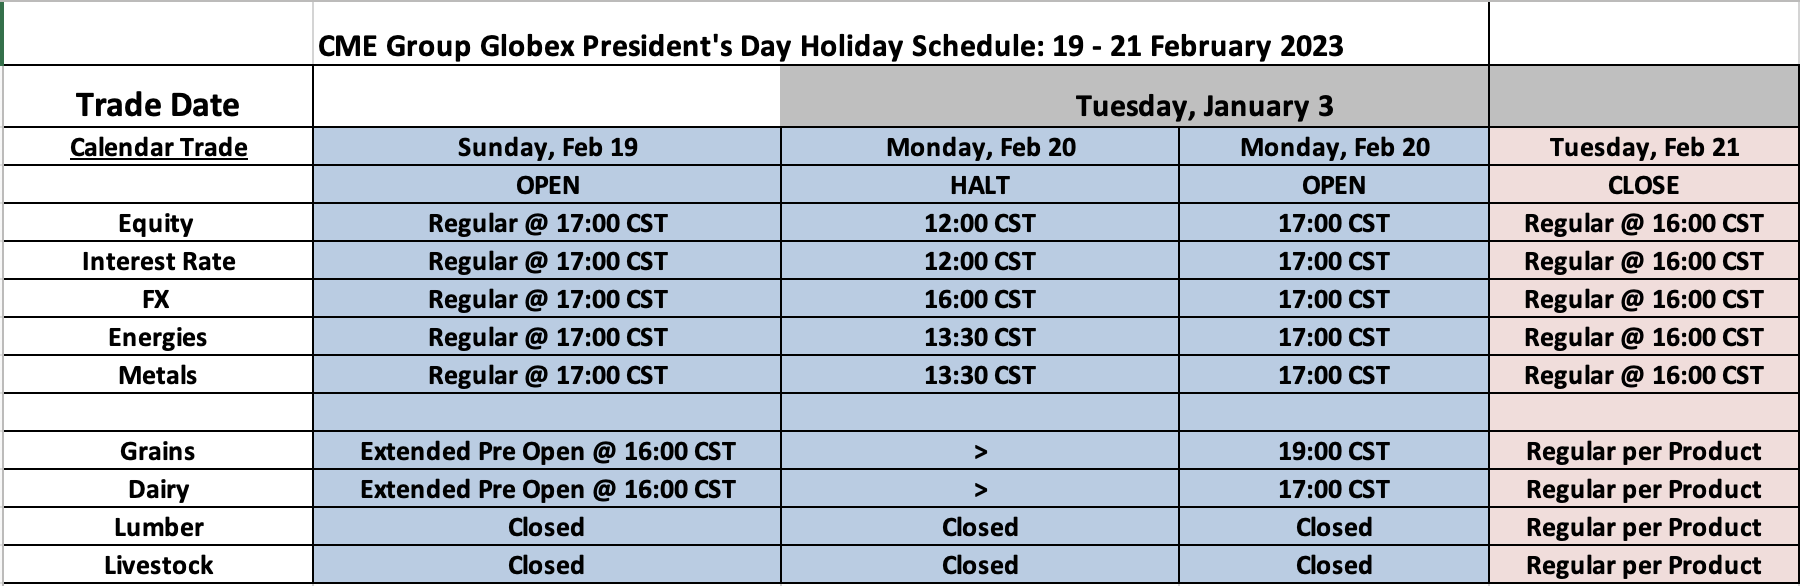 Presidents' Day Holiday Trading Schedule (2023)